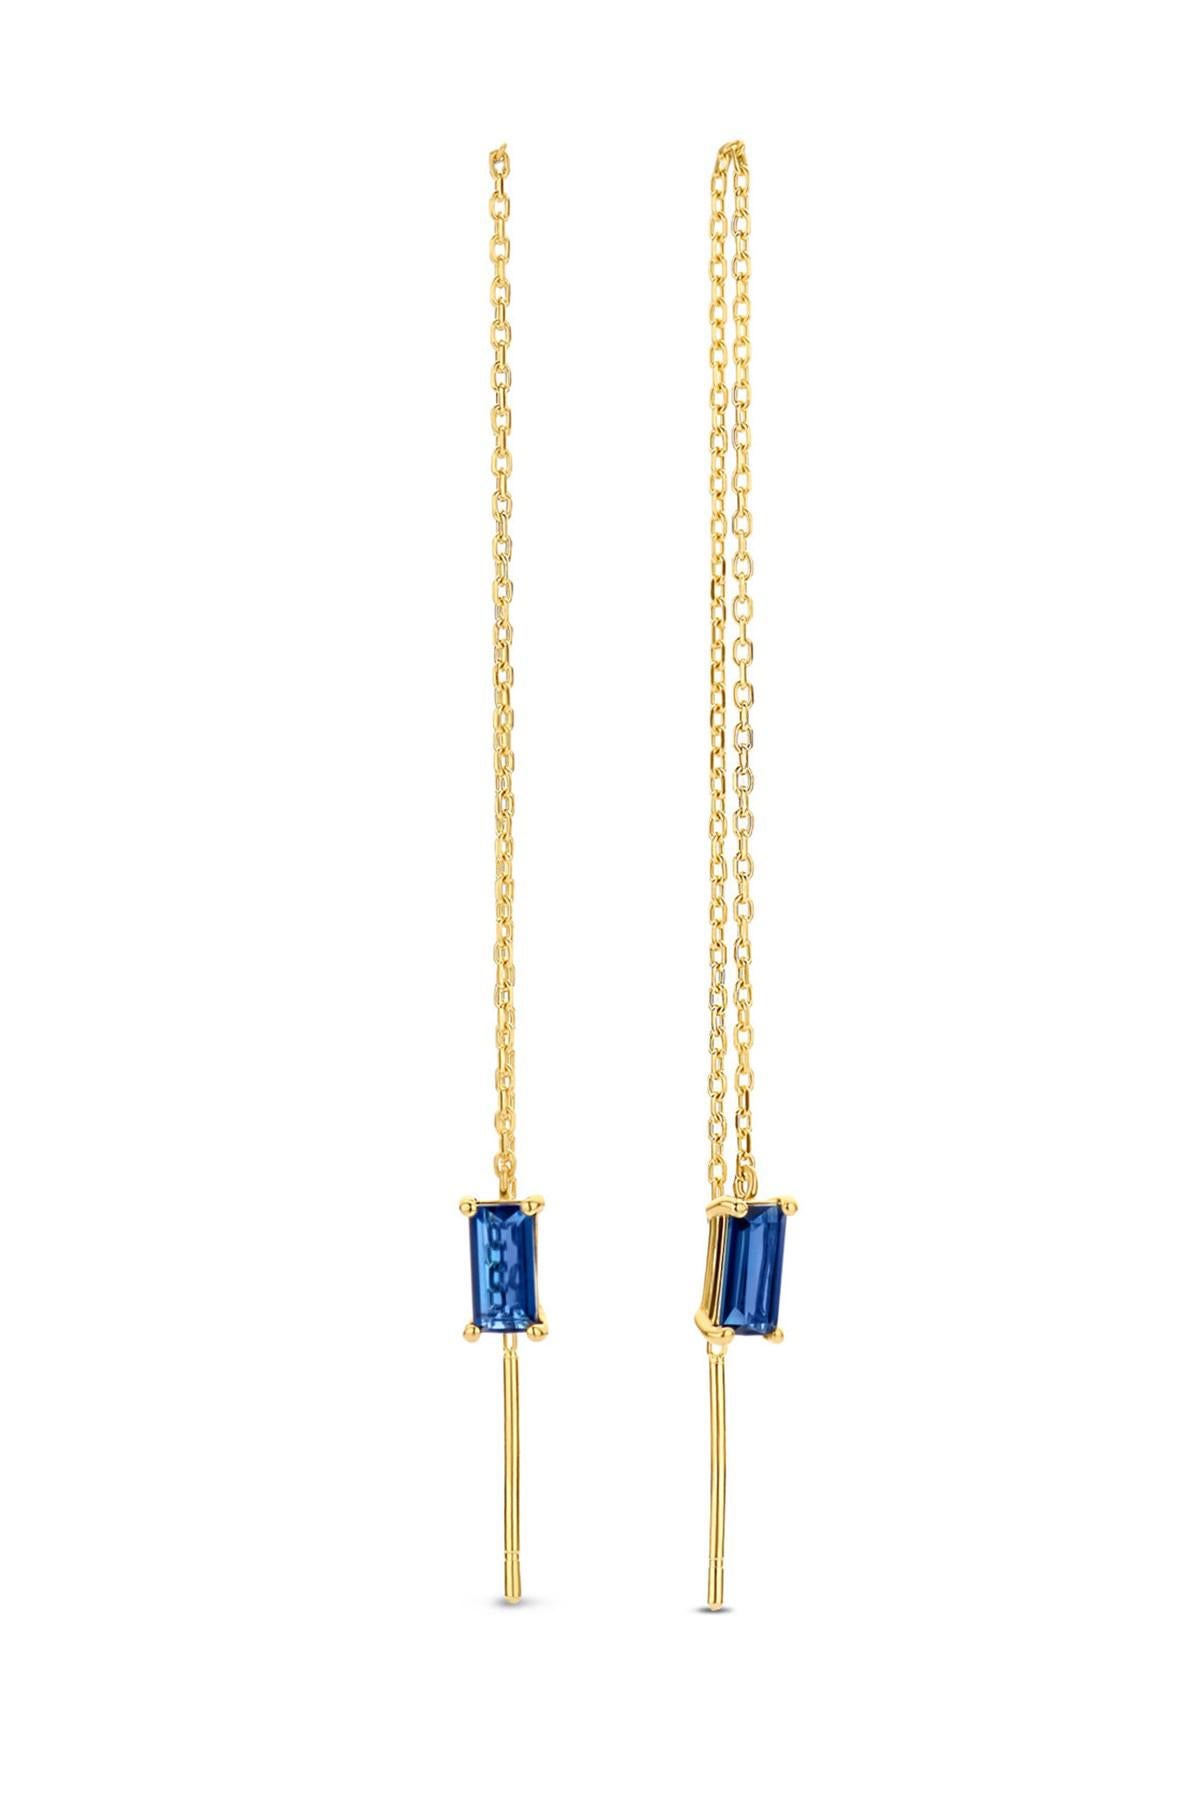 Modern 14k Solid Gold Drop Earrings with blue sapphire.  Chain Gold Earrings For Sale